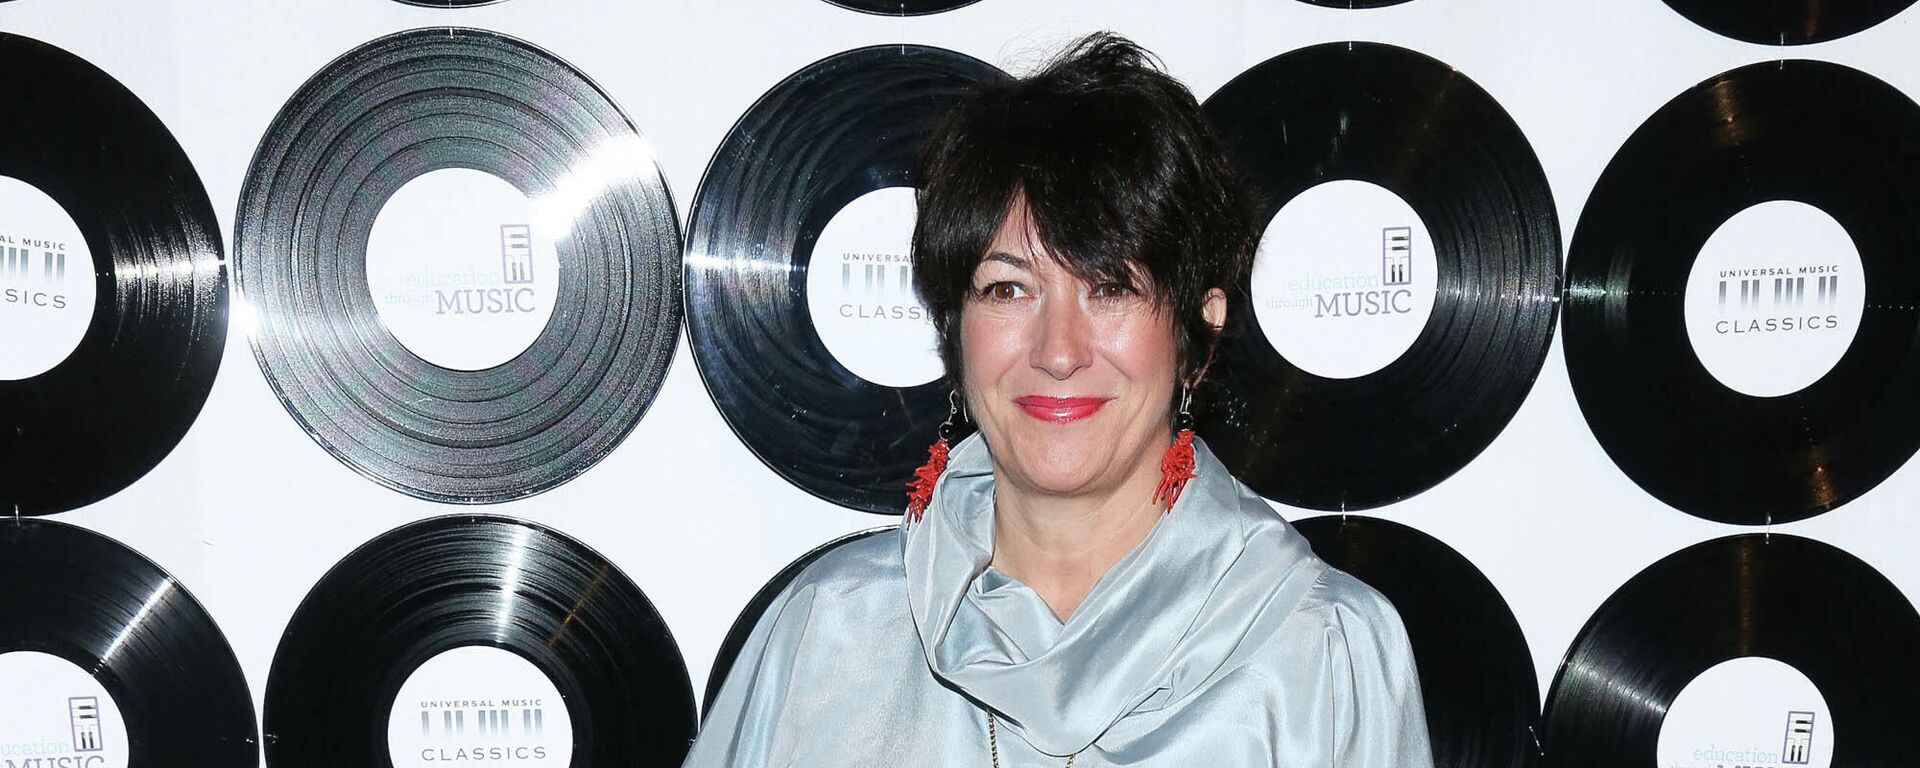 Ghislaine Maxwell attends the 2014 ETM (EDUCATION THROUGH MUSIC) Children's Benefit Gala at Capitale on May 6, 2014 in New York City.   - Sputnik International, 1920, 23.01.2022